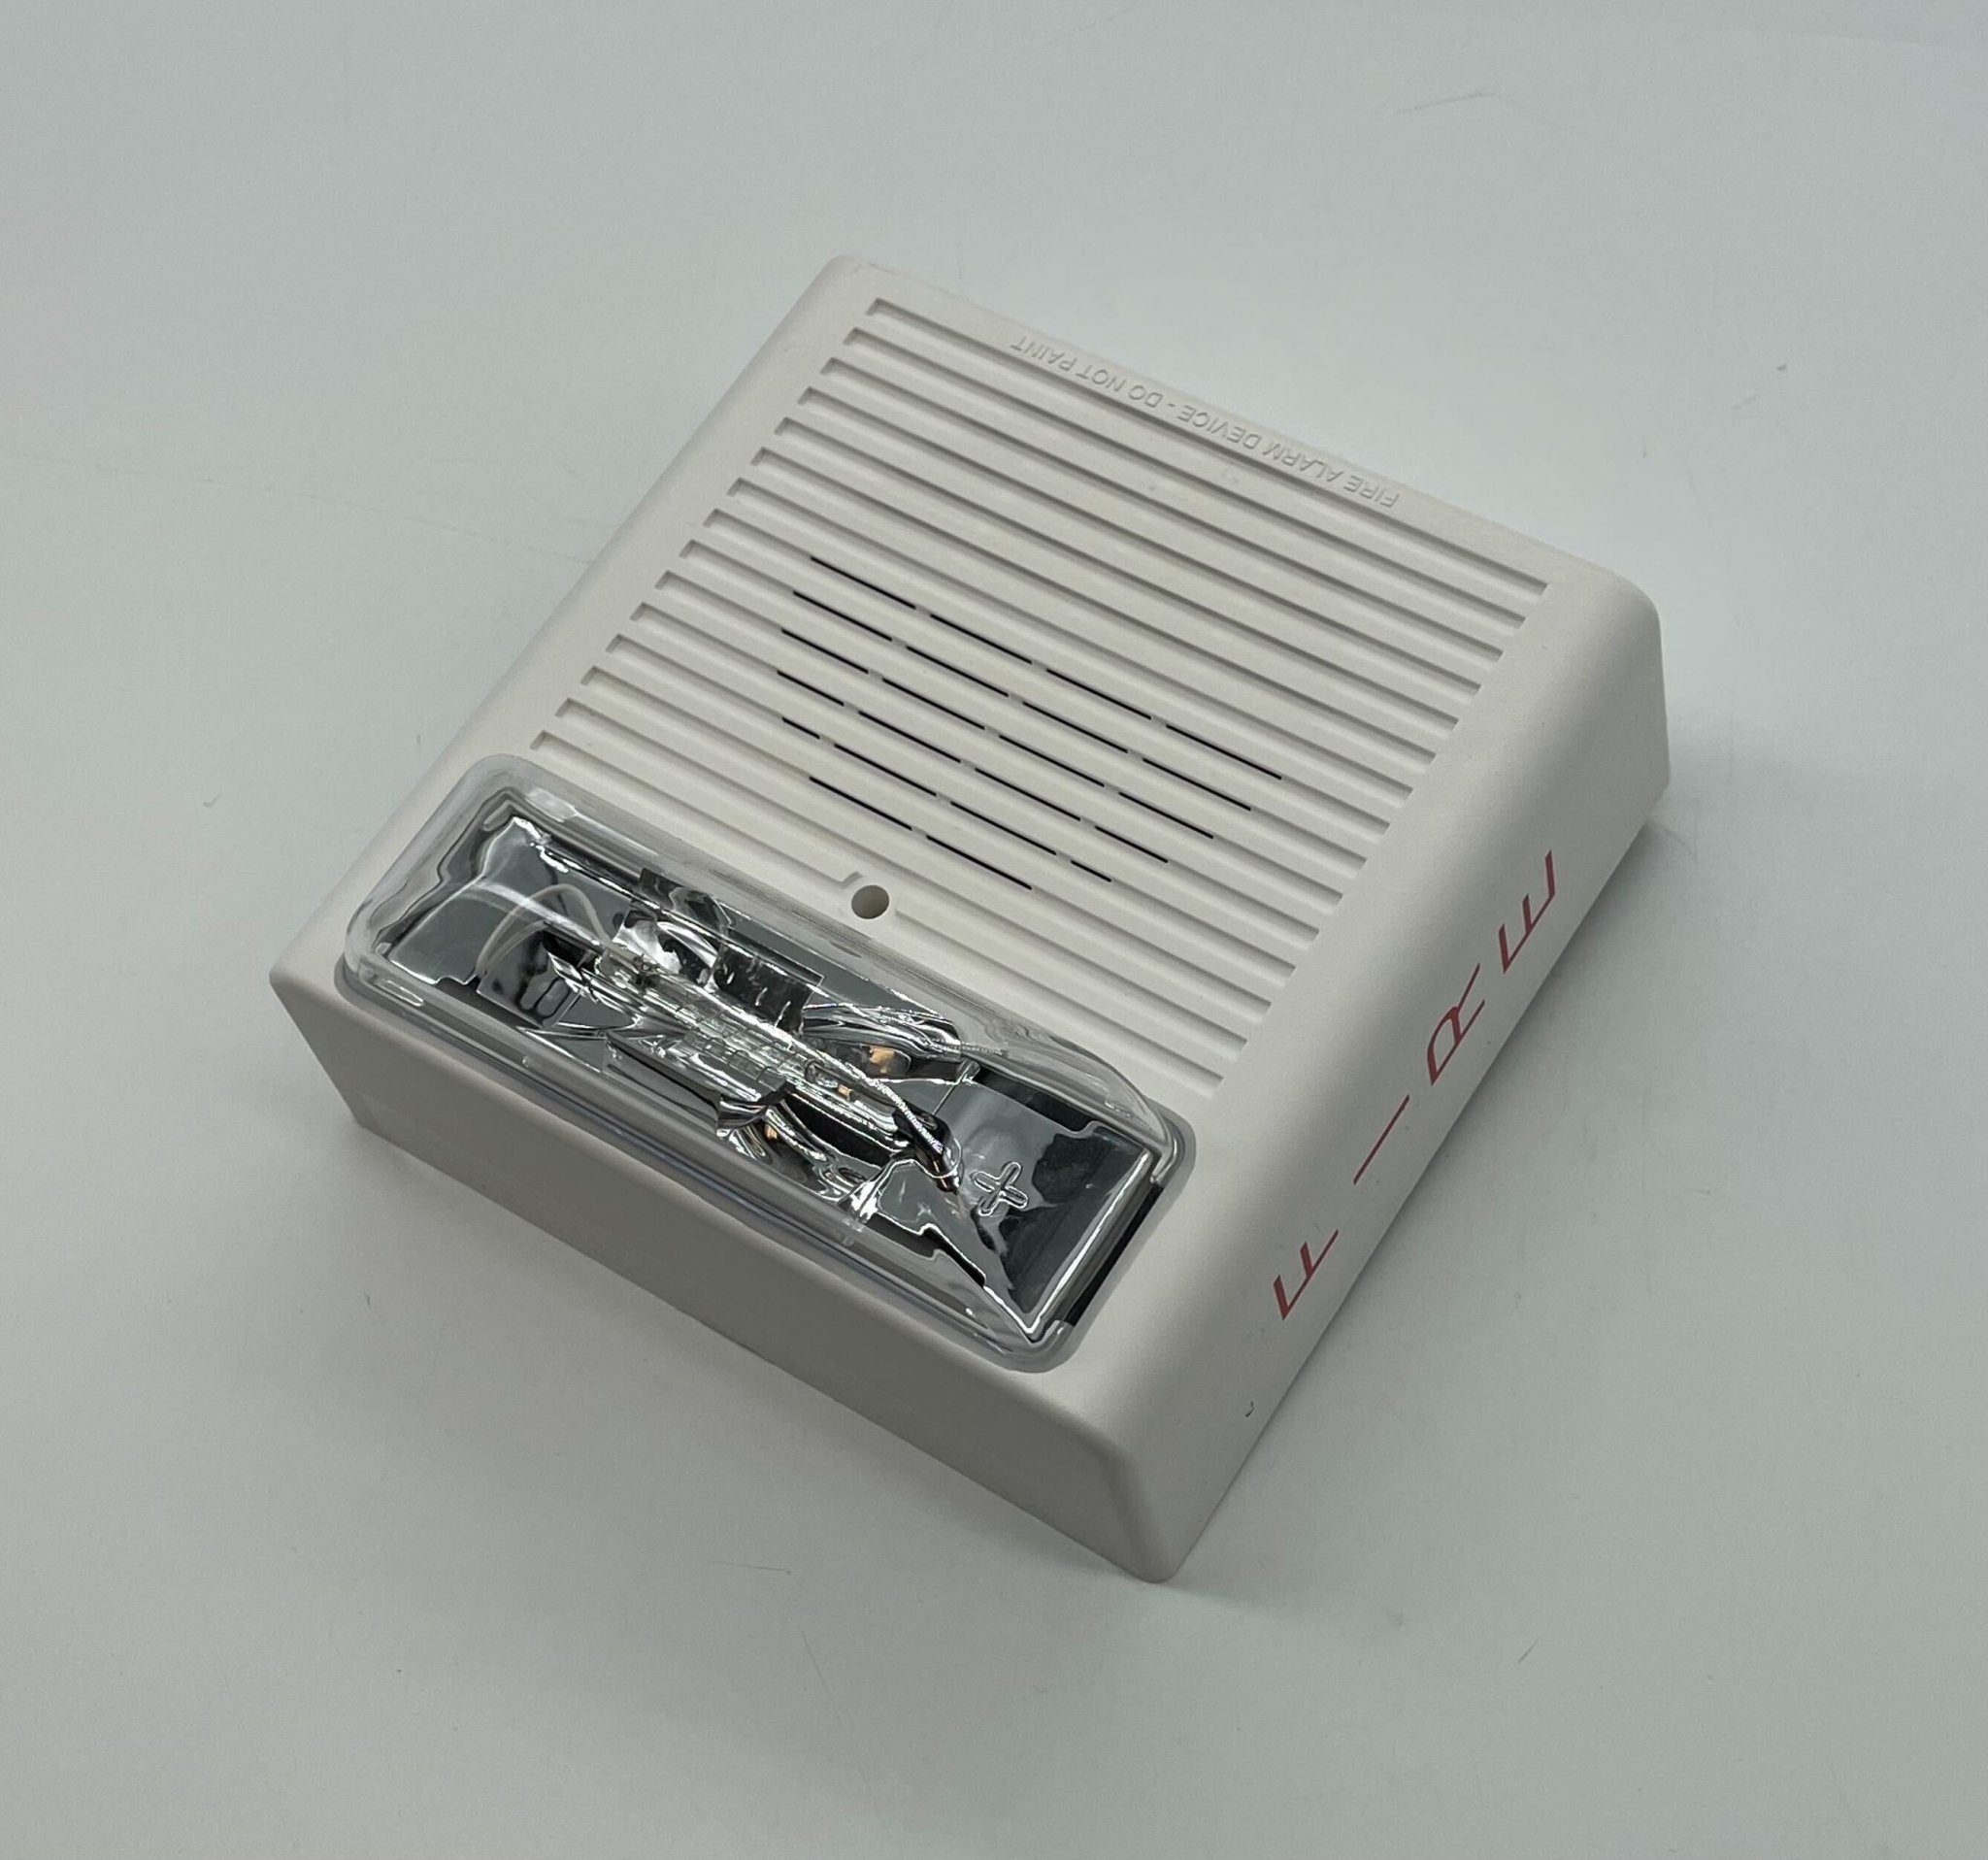 Wheelock ASWP-24MCWH-FW - The Fire Alarm Supplier